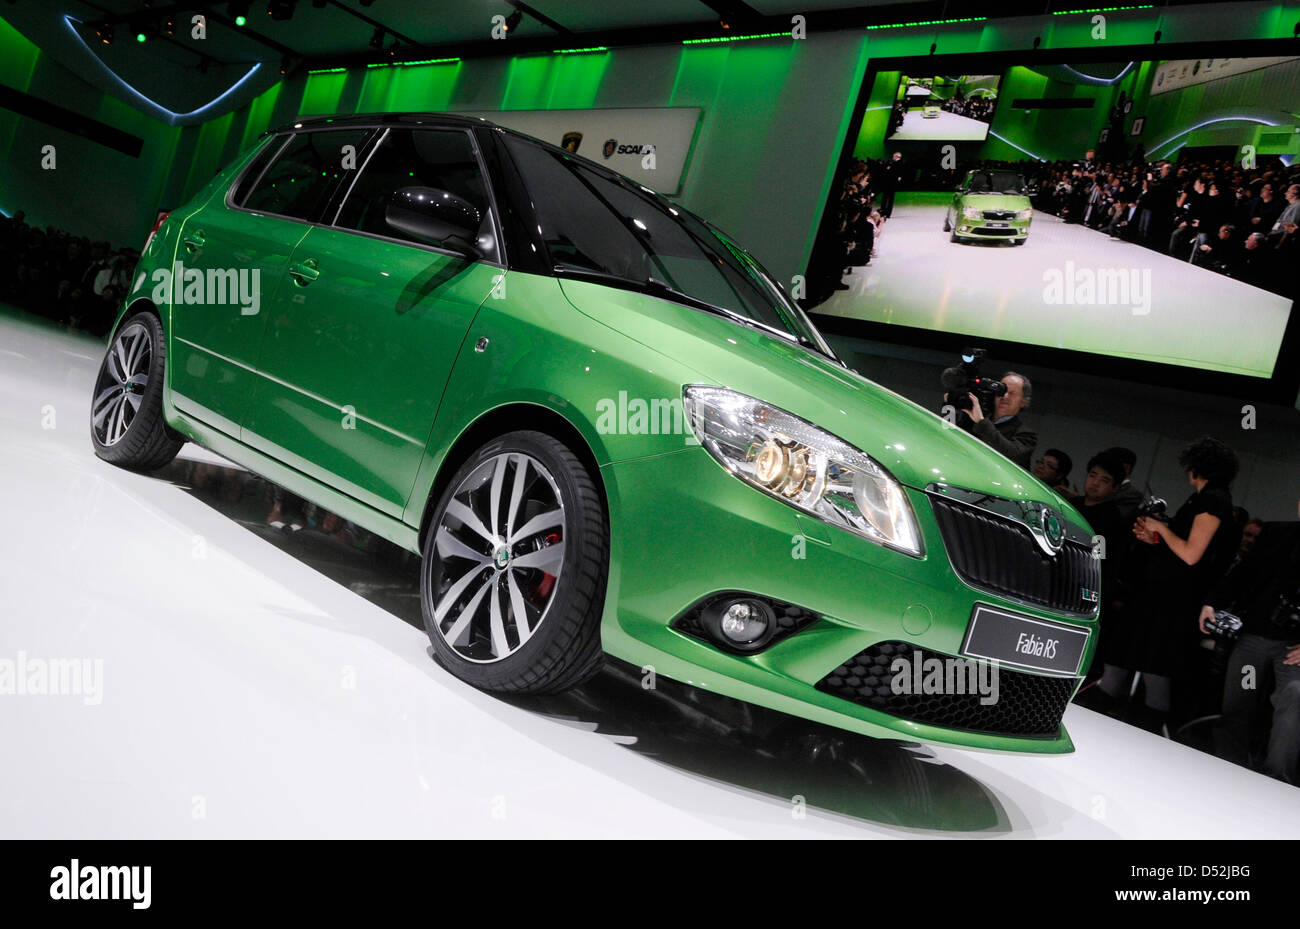 Volkswagen presents the new Skoda Fabia RS prior to the first press day at  the Geneva Motor Show in Geneva, Switzerland, 01 March 2010. The 80th  international motor show in Geneva wants